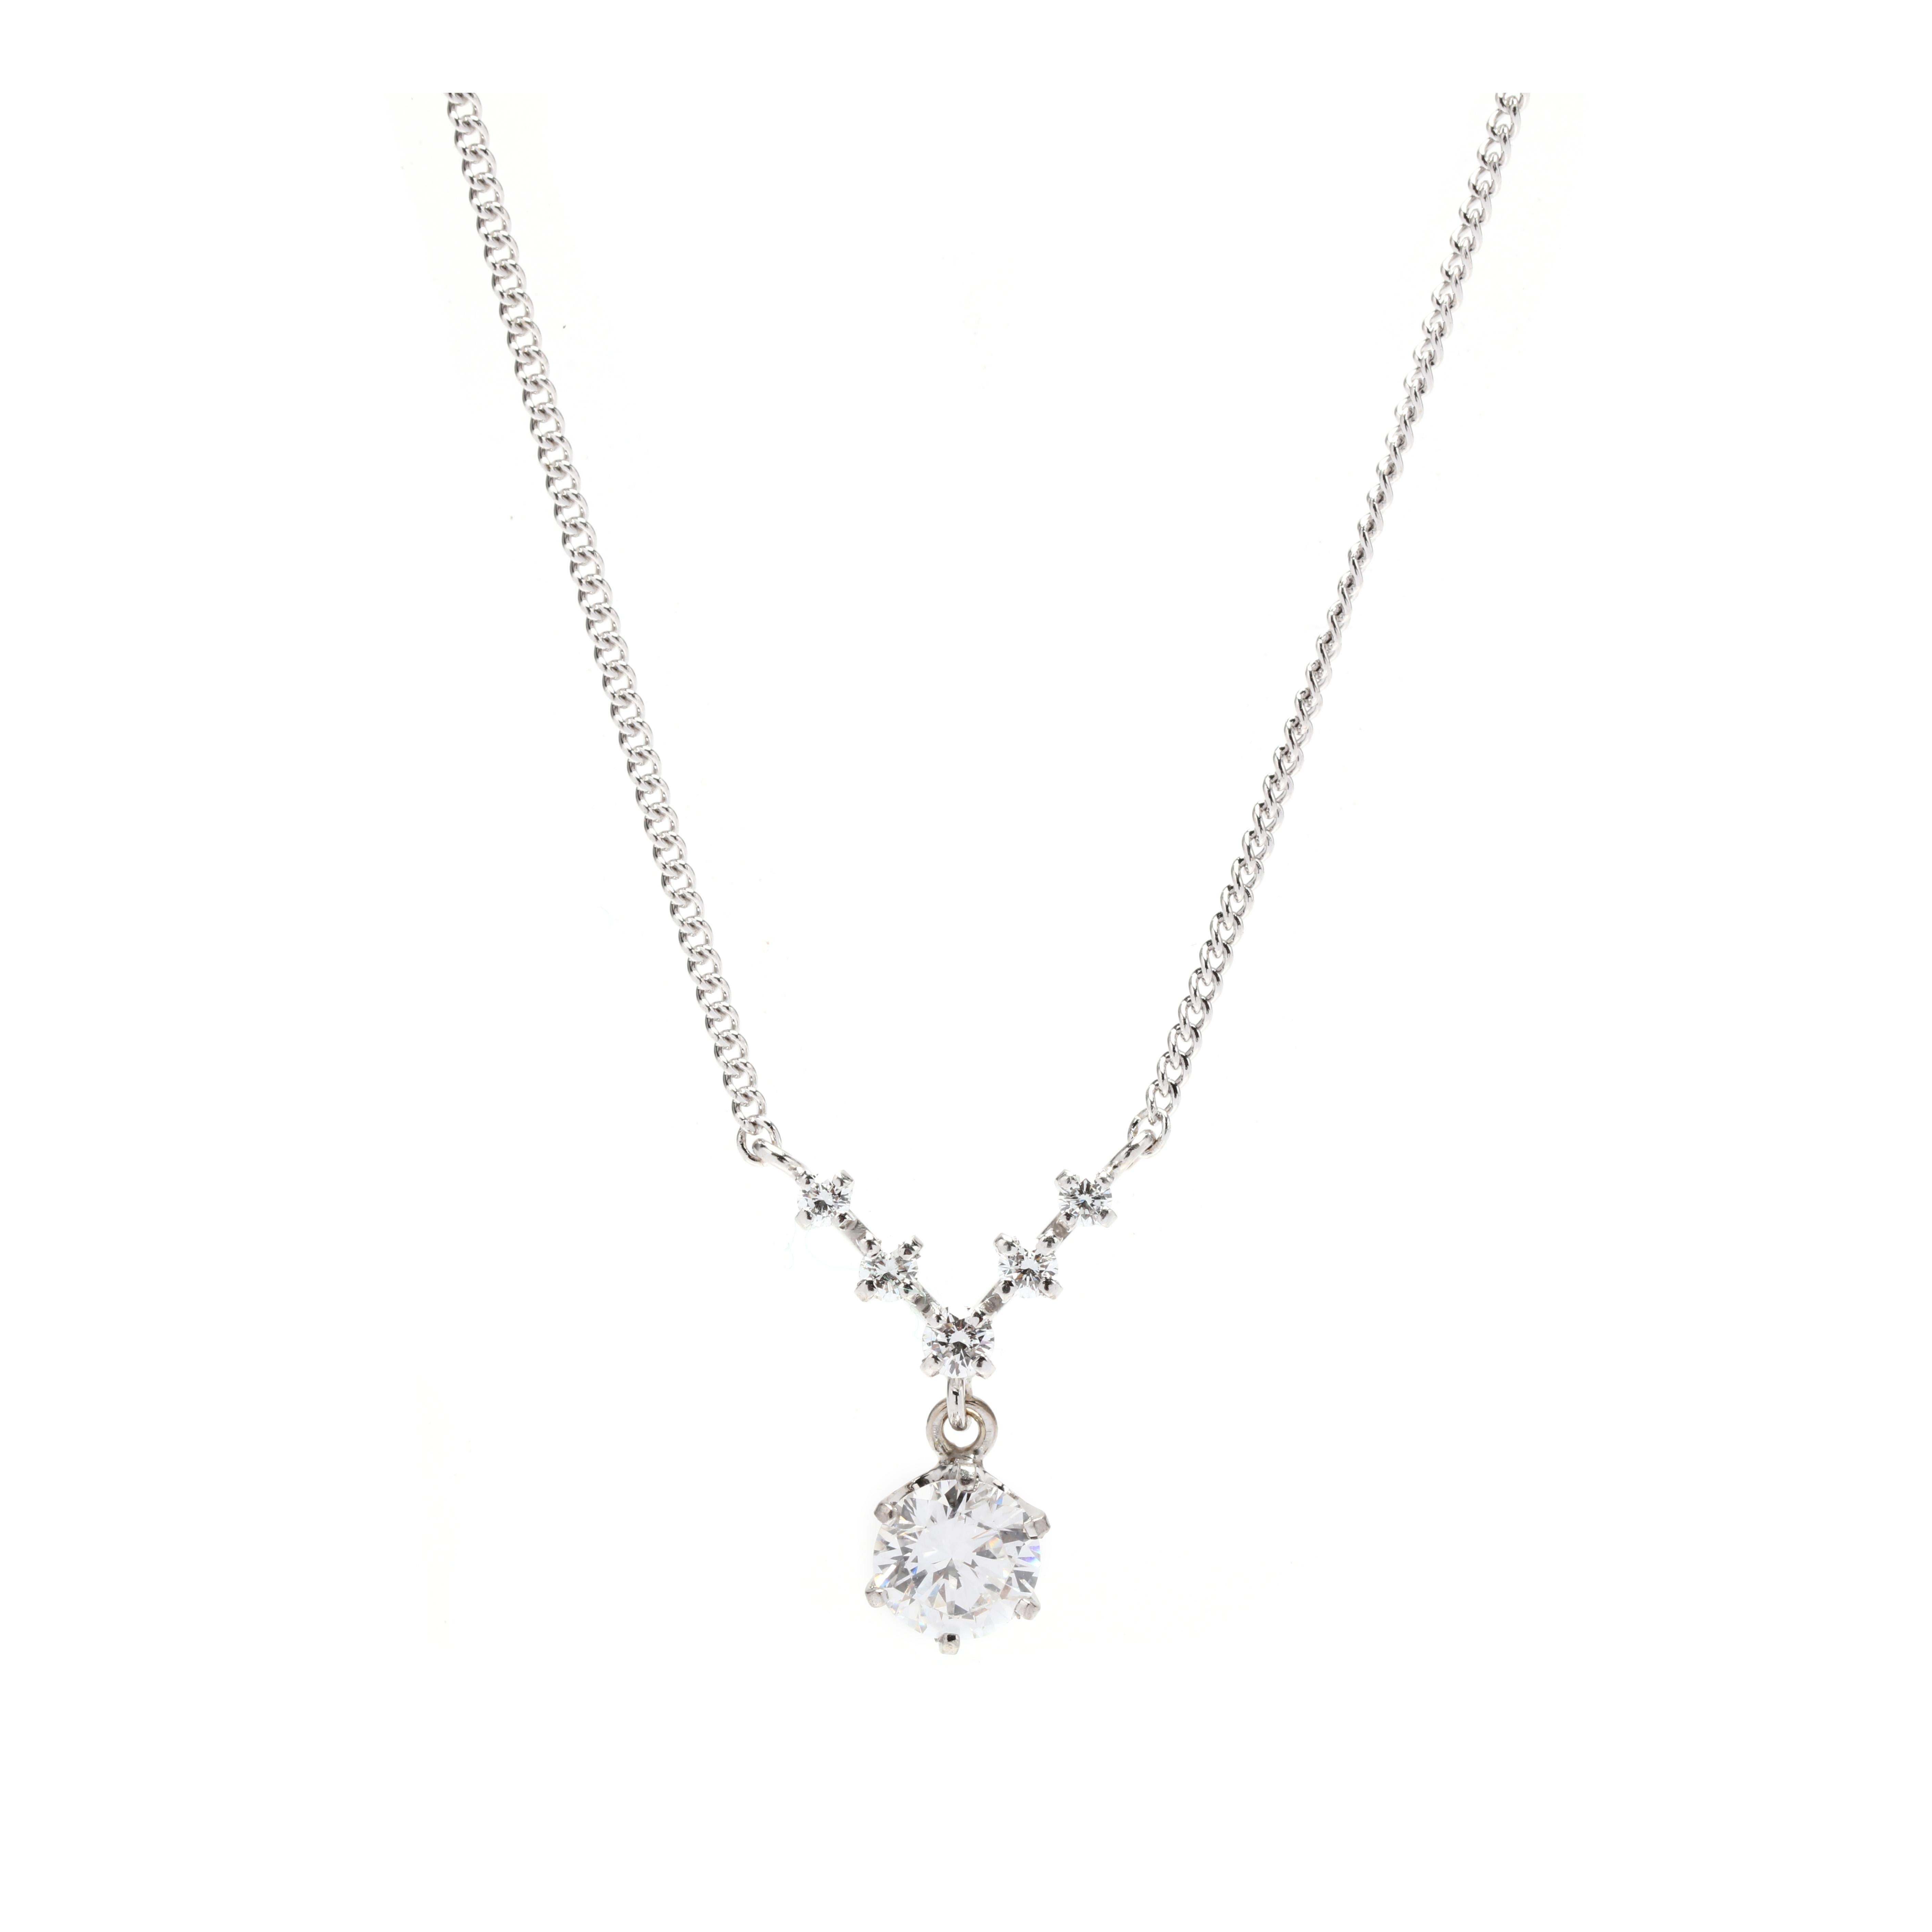 This 0.75ctw diamond dangle v necklace will make a beautiful statement. Crafted in 14K white gold, the necklace features 0.75ctw of sparkling diamonds. The length of the necklace is 16.5 inches, perfect for everyday wear. The simple yet elegant